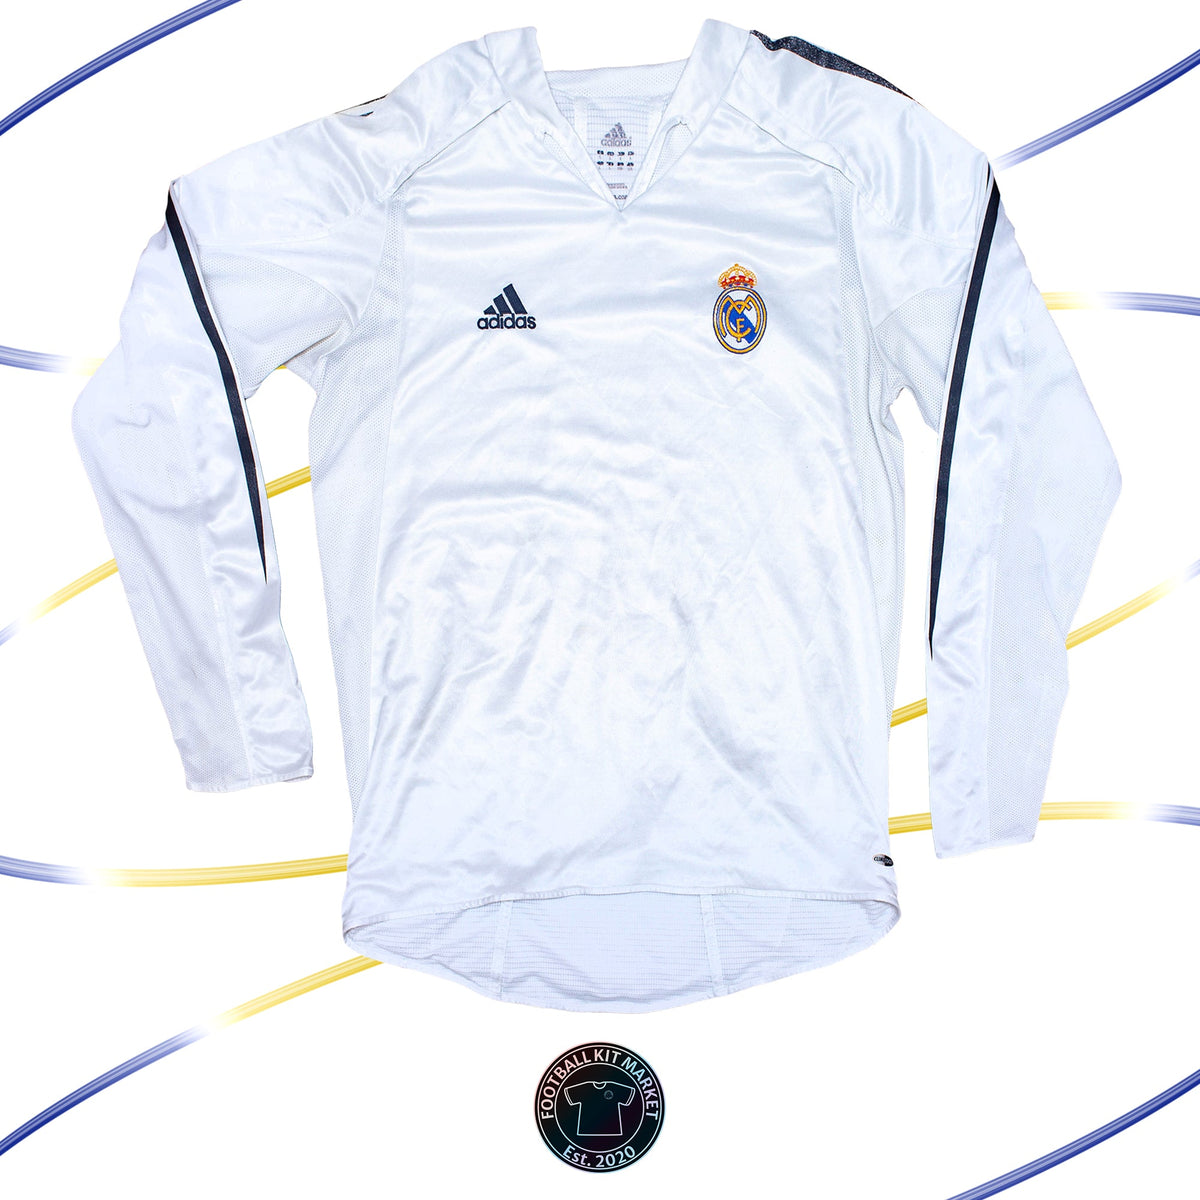 Genuine REAL MADRID Home Shirt (2004-2005) - ADIDAS (L) - Product Image from Football Kit Market